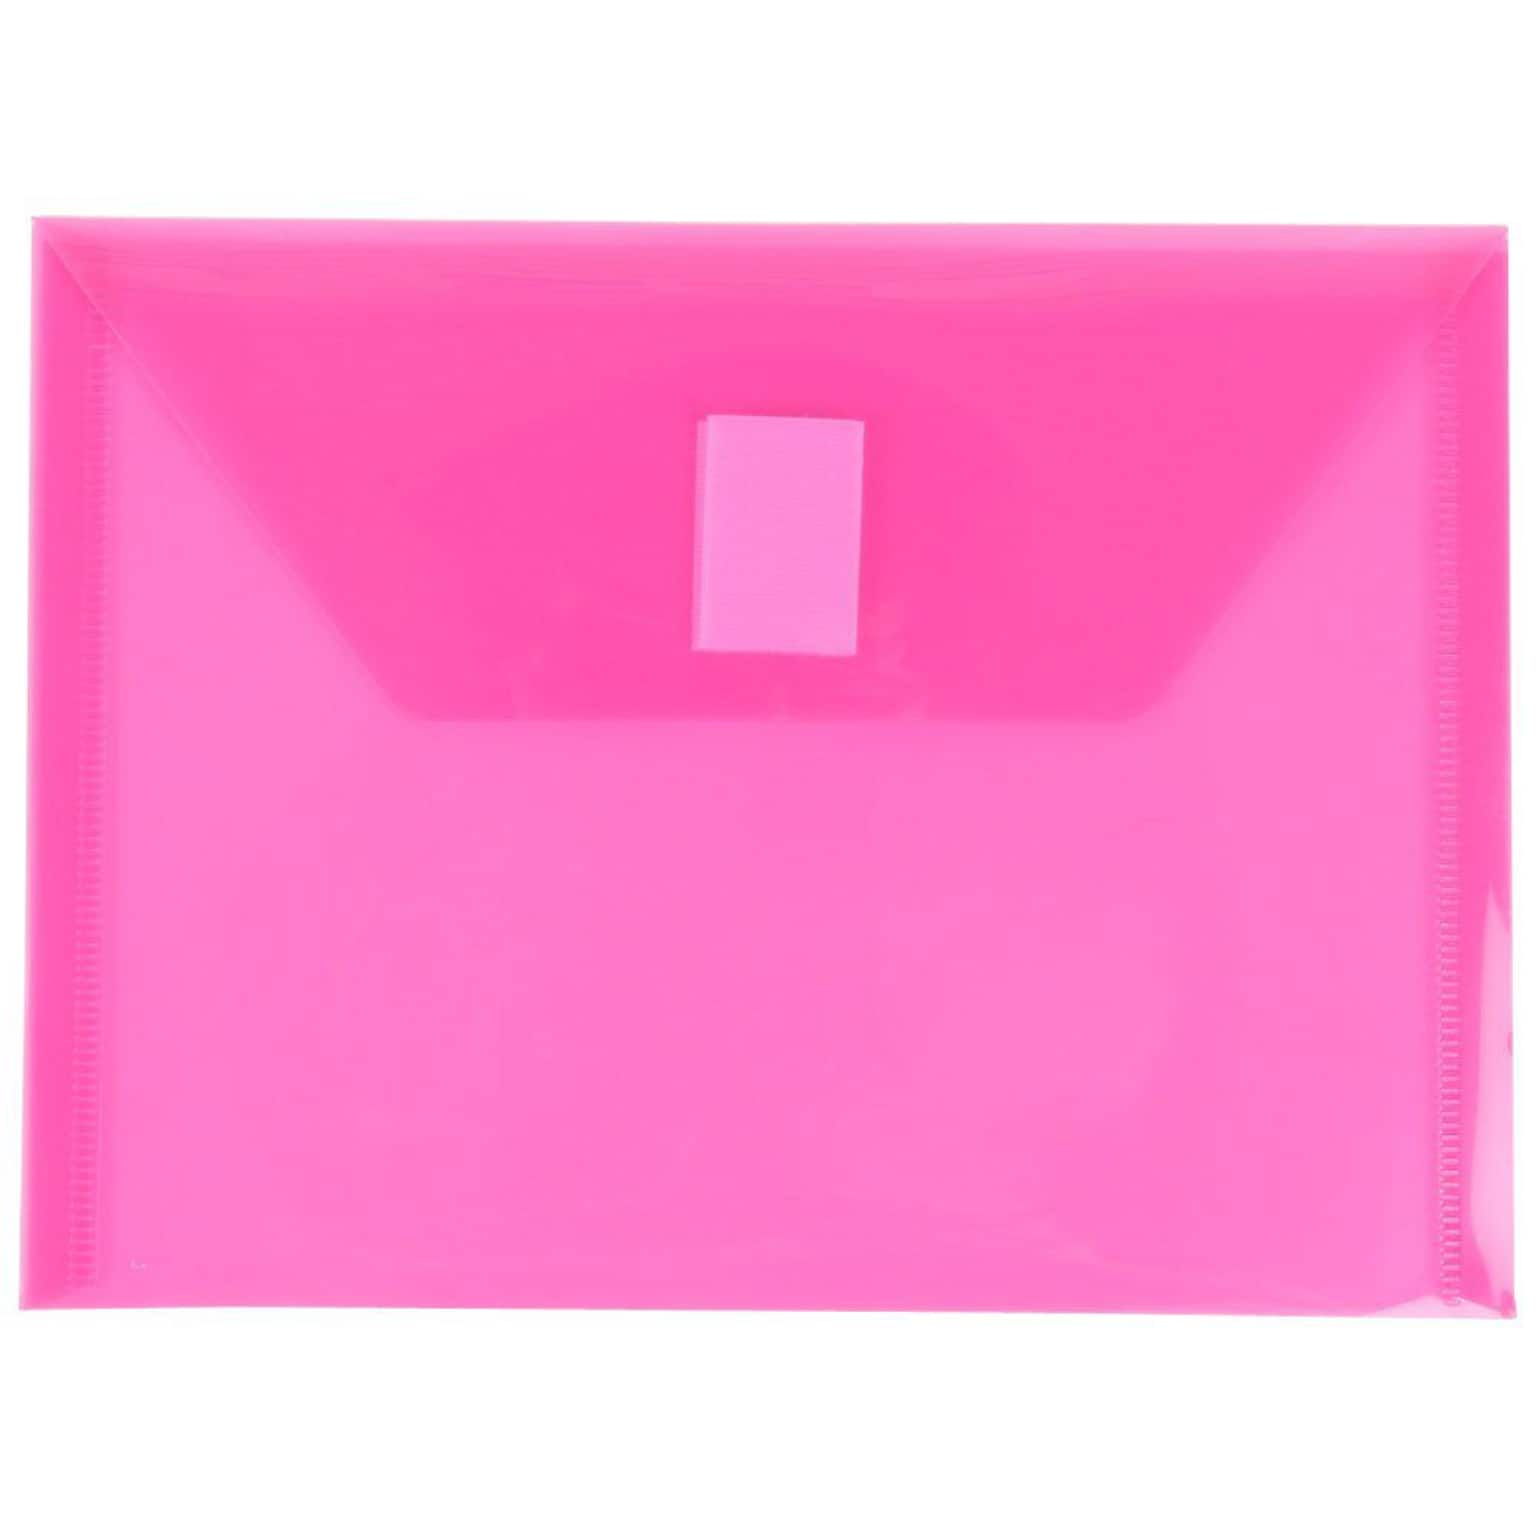 JAM Paper® Plastic Envelopes with Hook & Loop Closure, Index Booklet, 5.5 x 7.5, Fuchsia Pink Poly, 12/Pack (920V0FU)